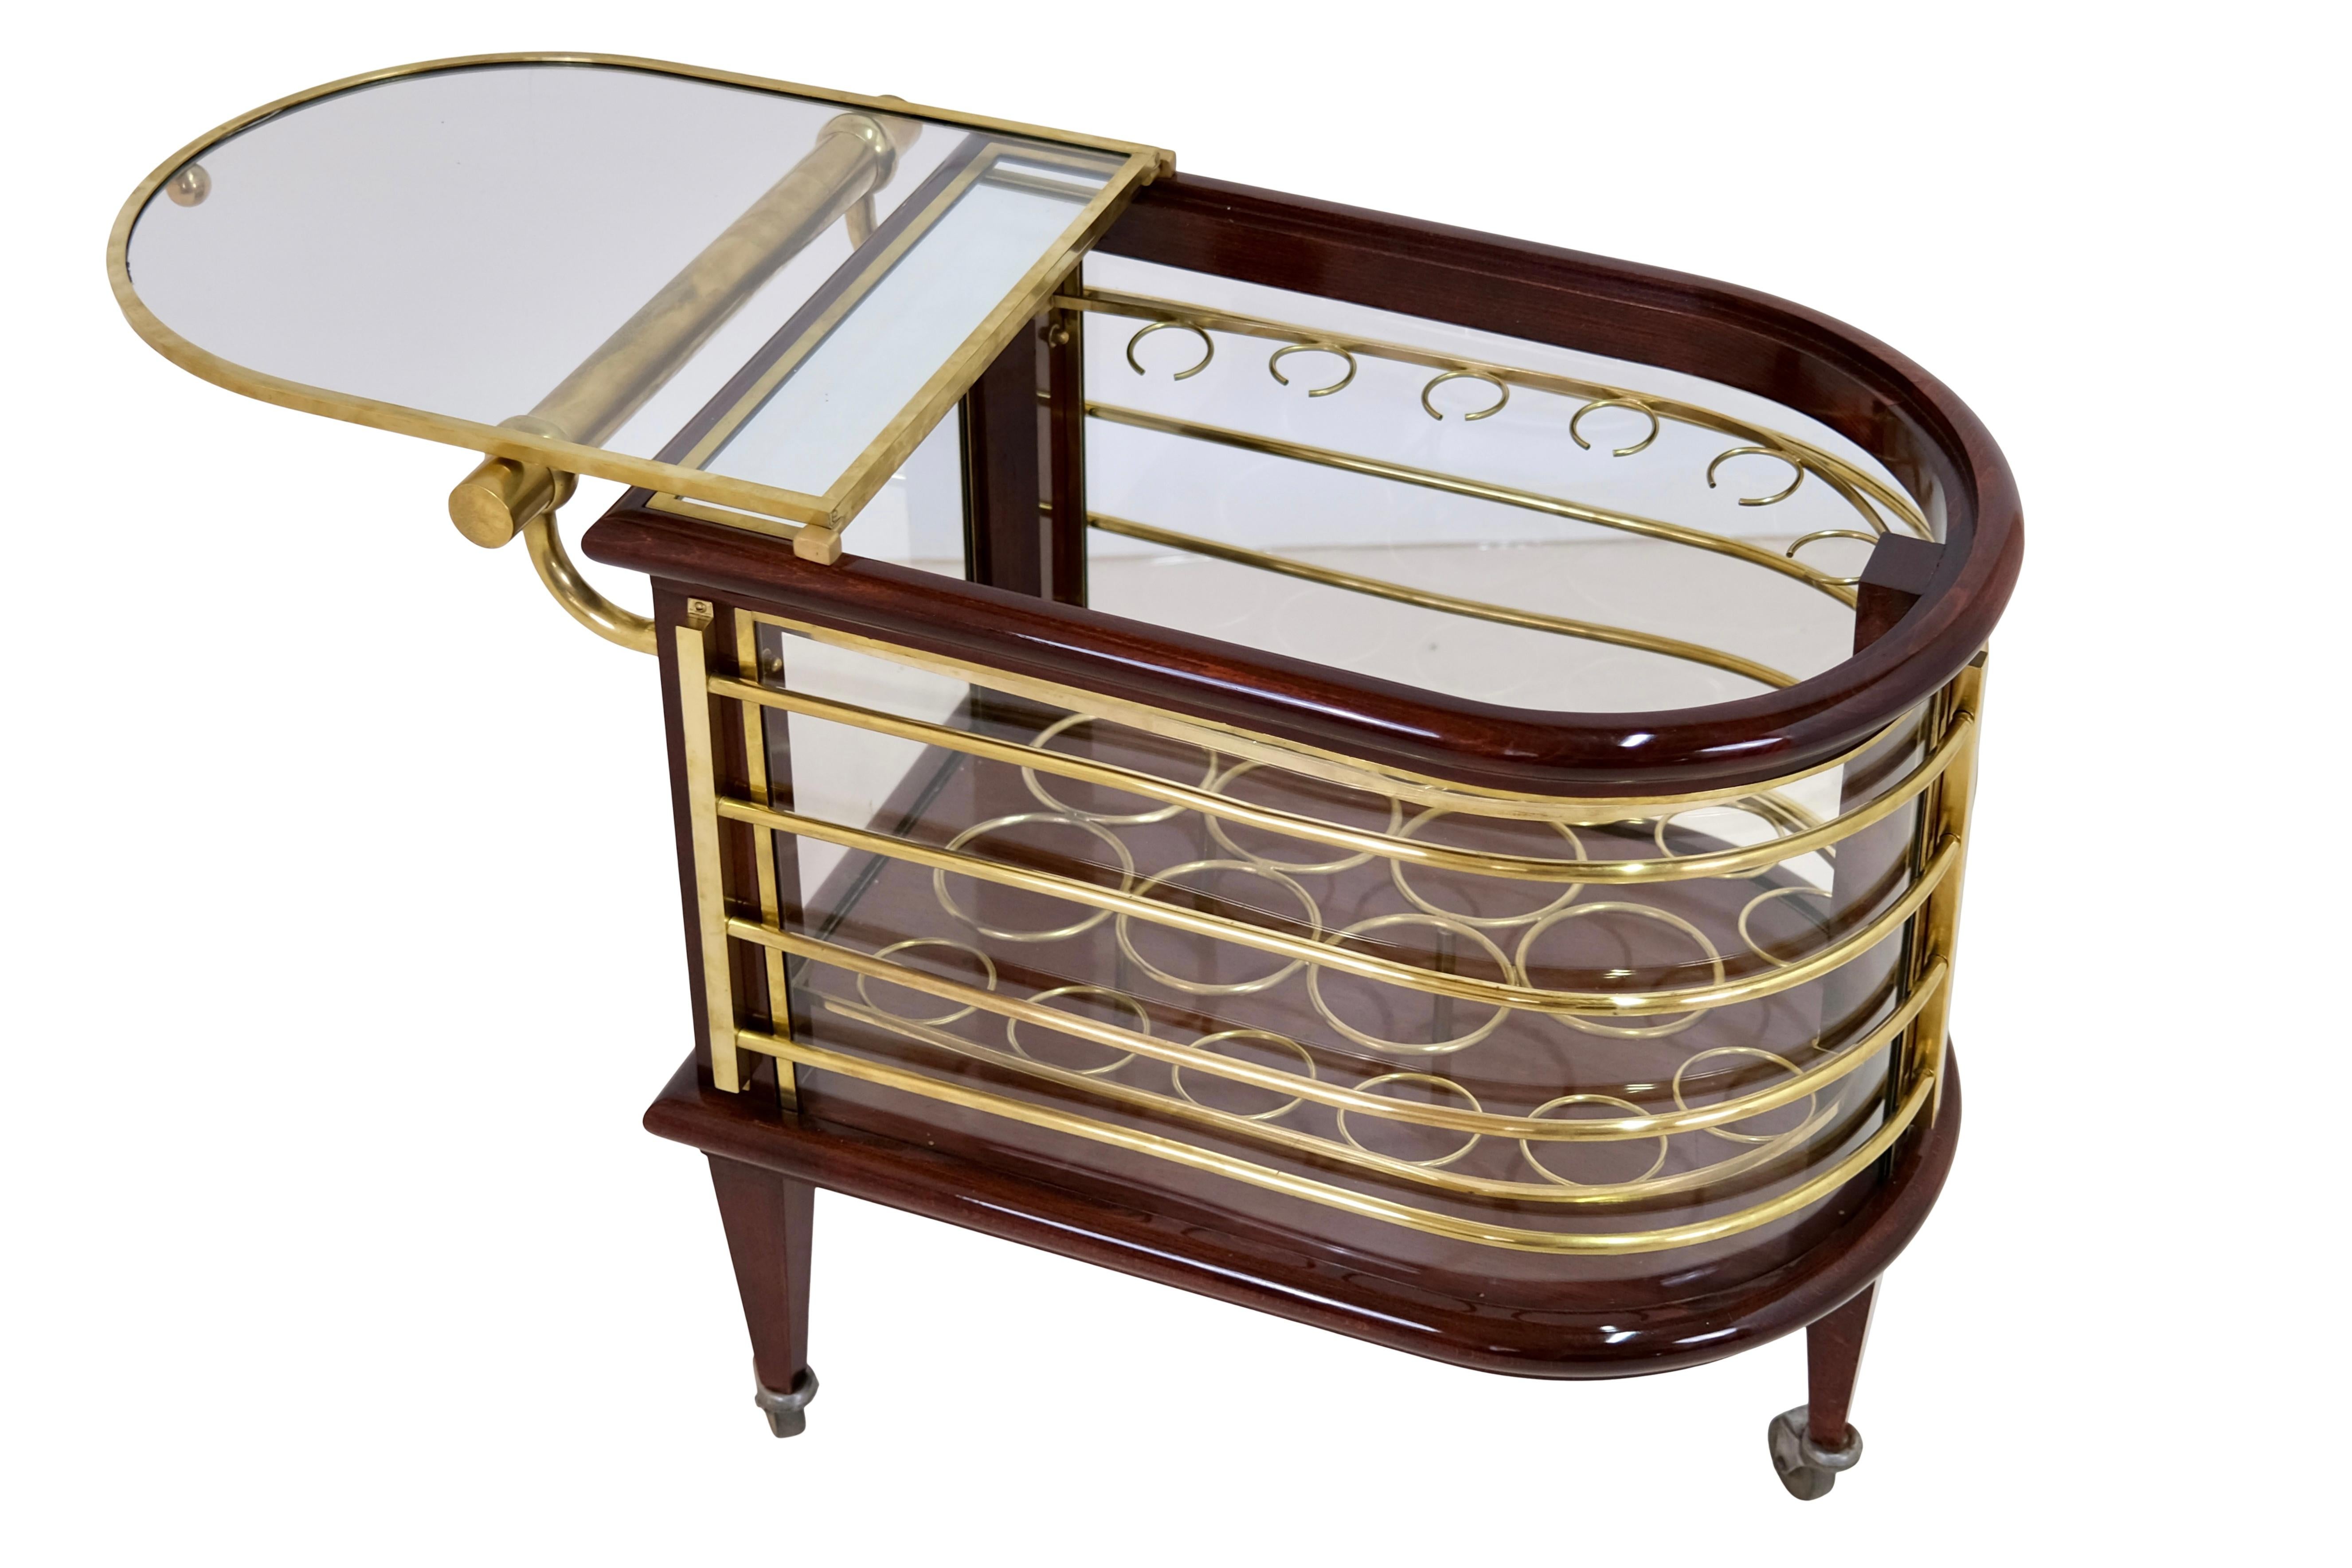 Early 20th Century Exceptional 1920s French Art Deco Bar Cart in Wood and Brass with Vitrine Case